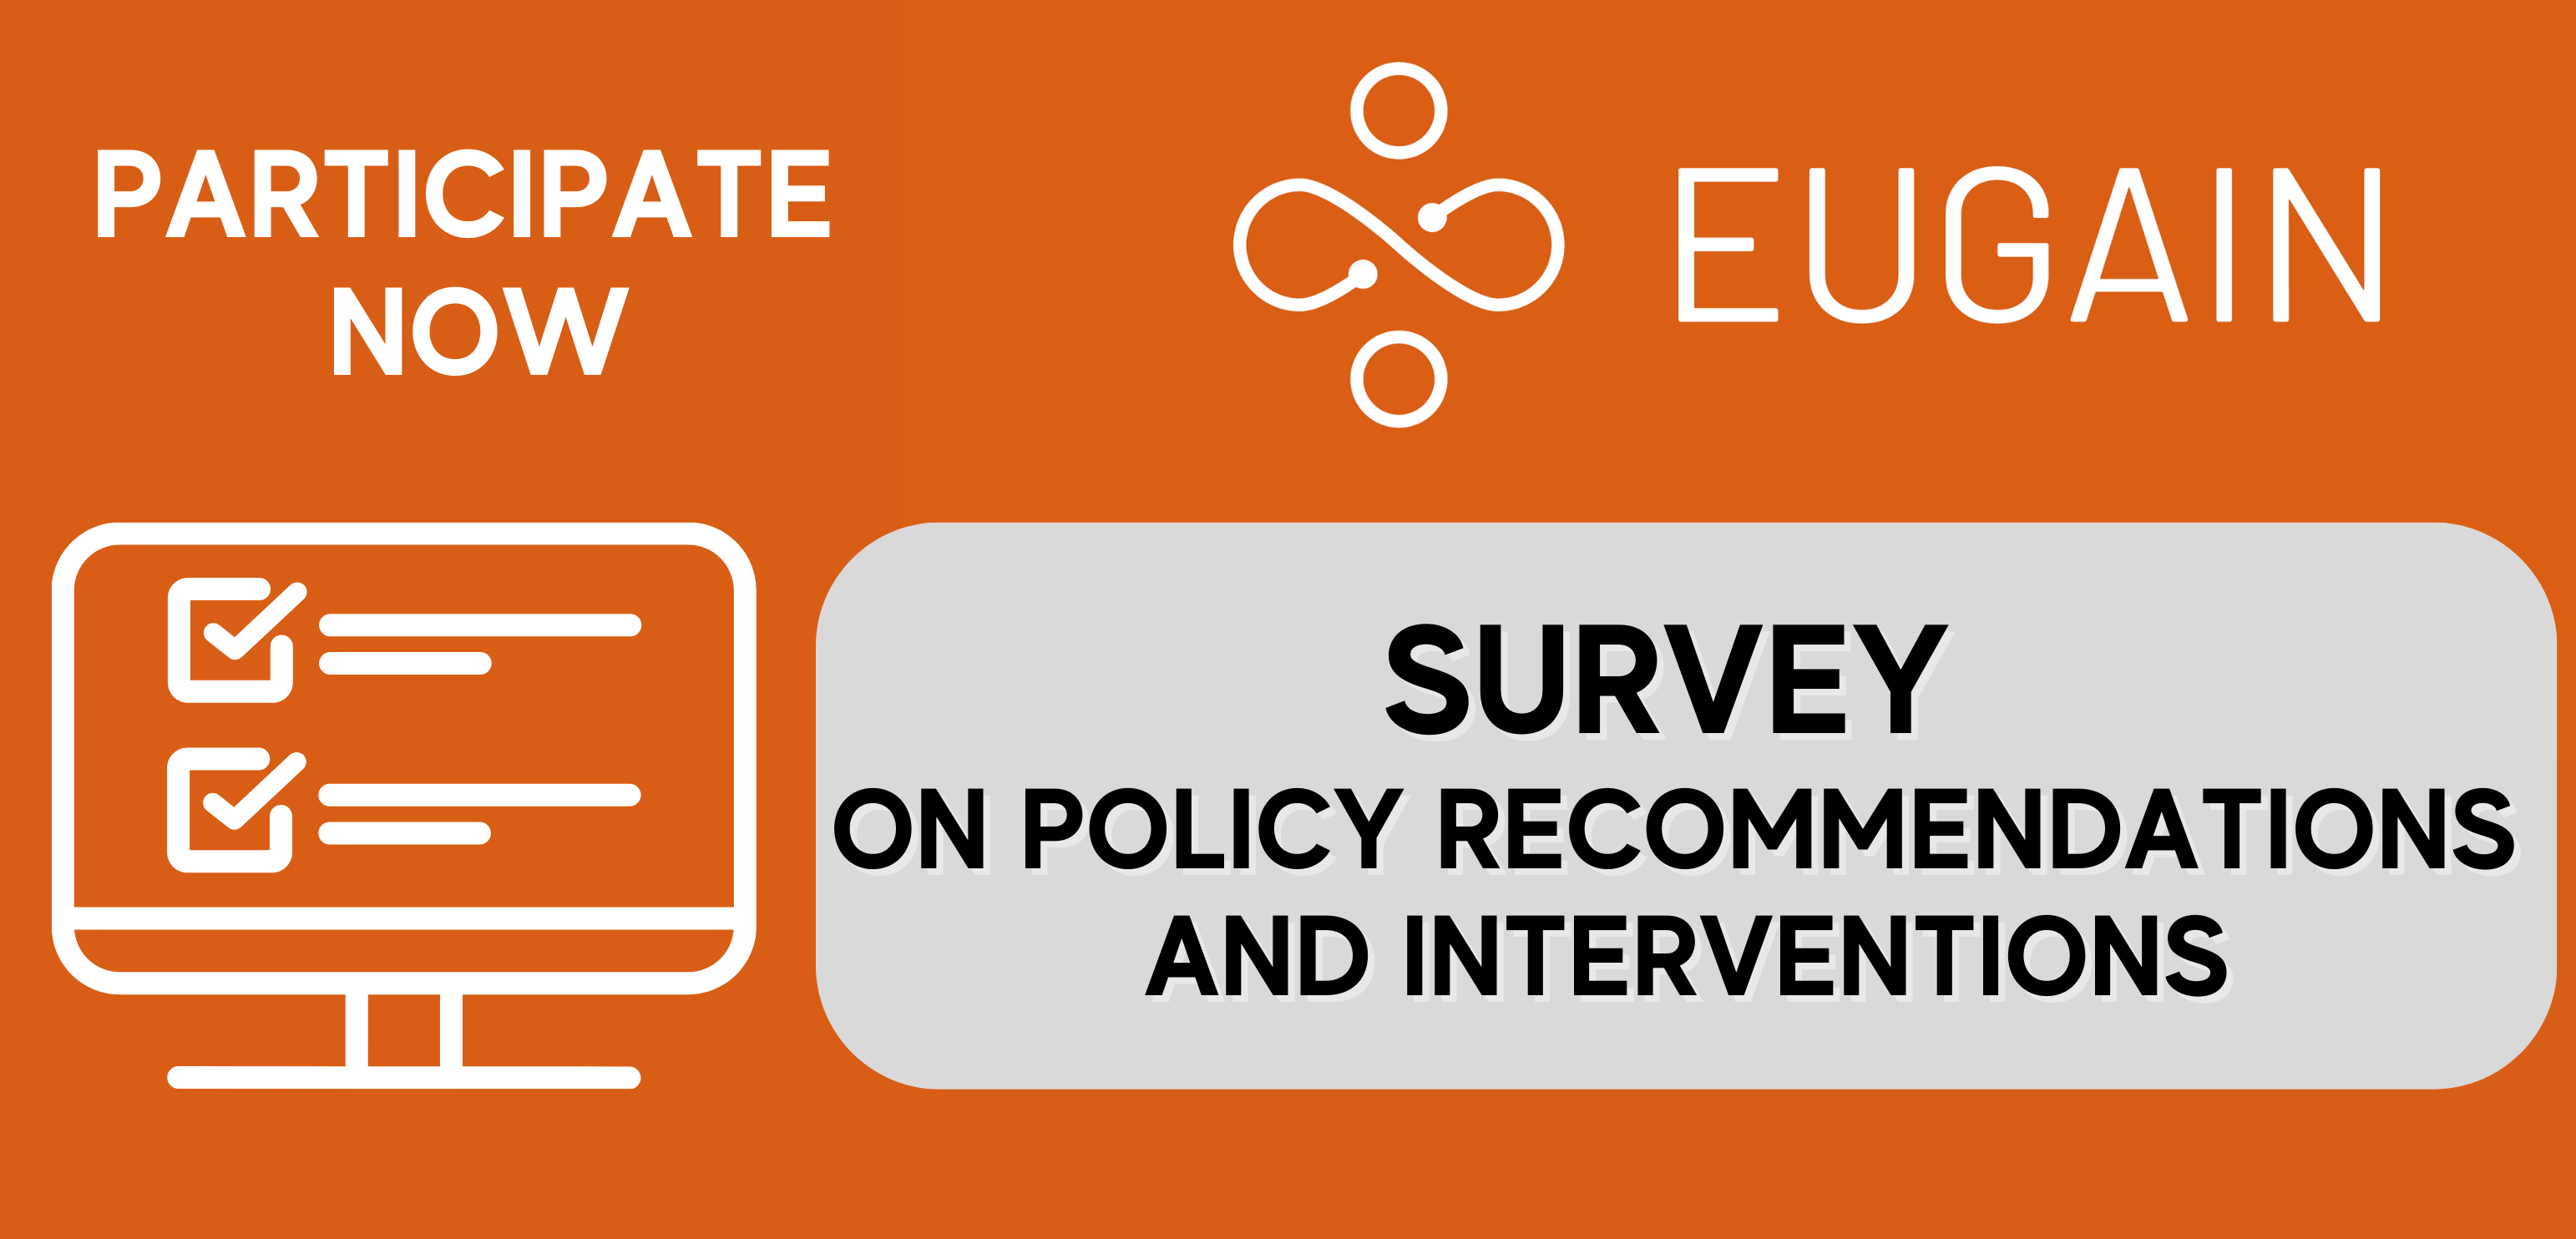 EUGAIN survey on policy recommendations